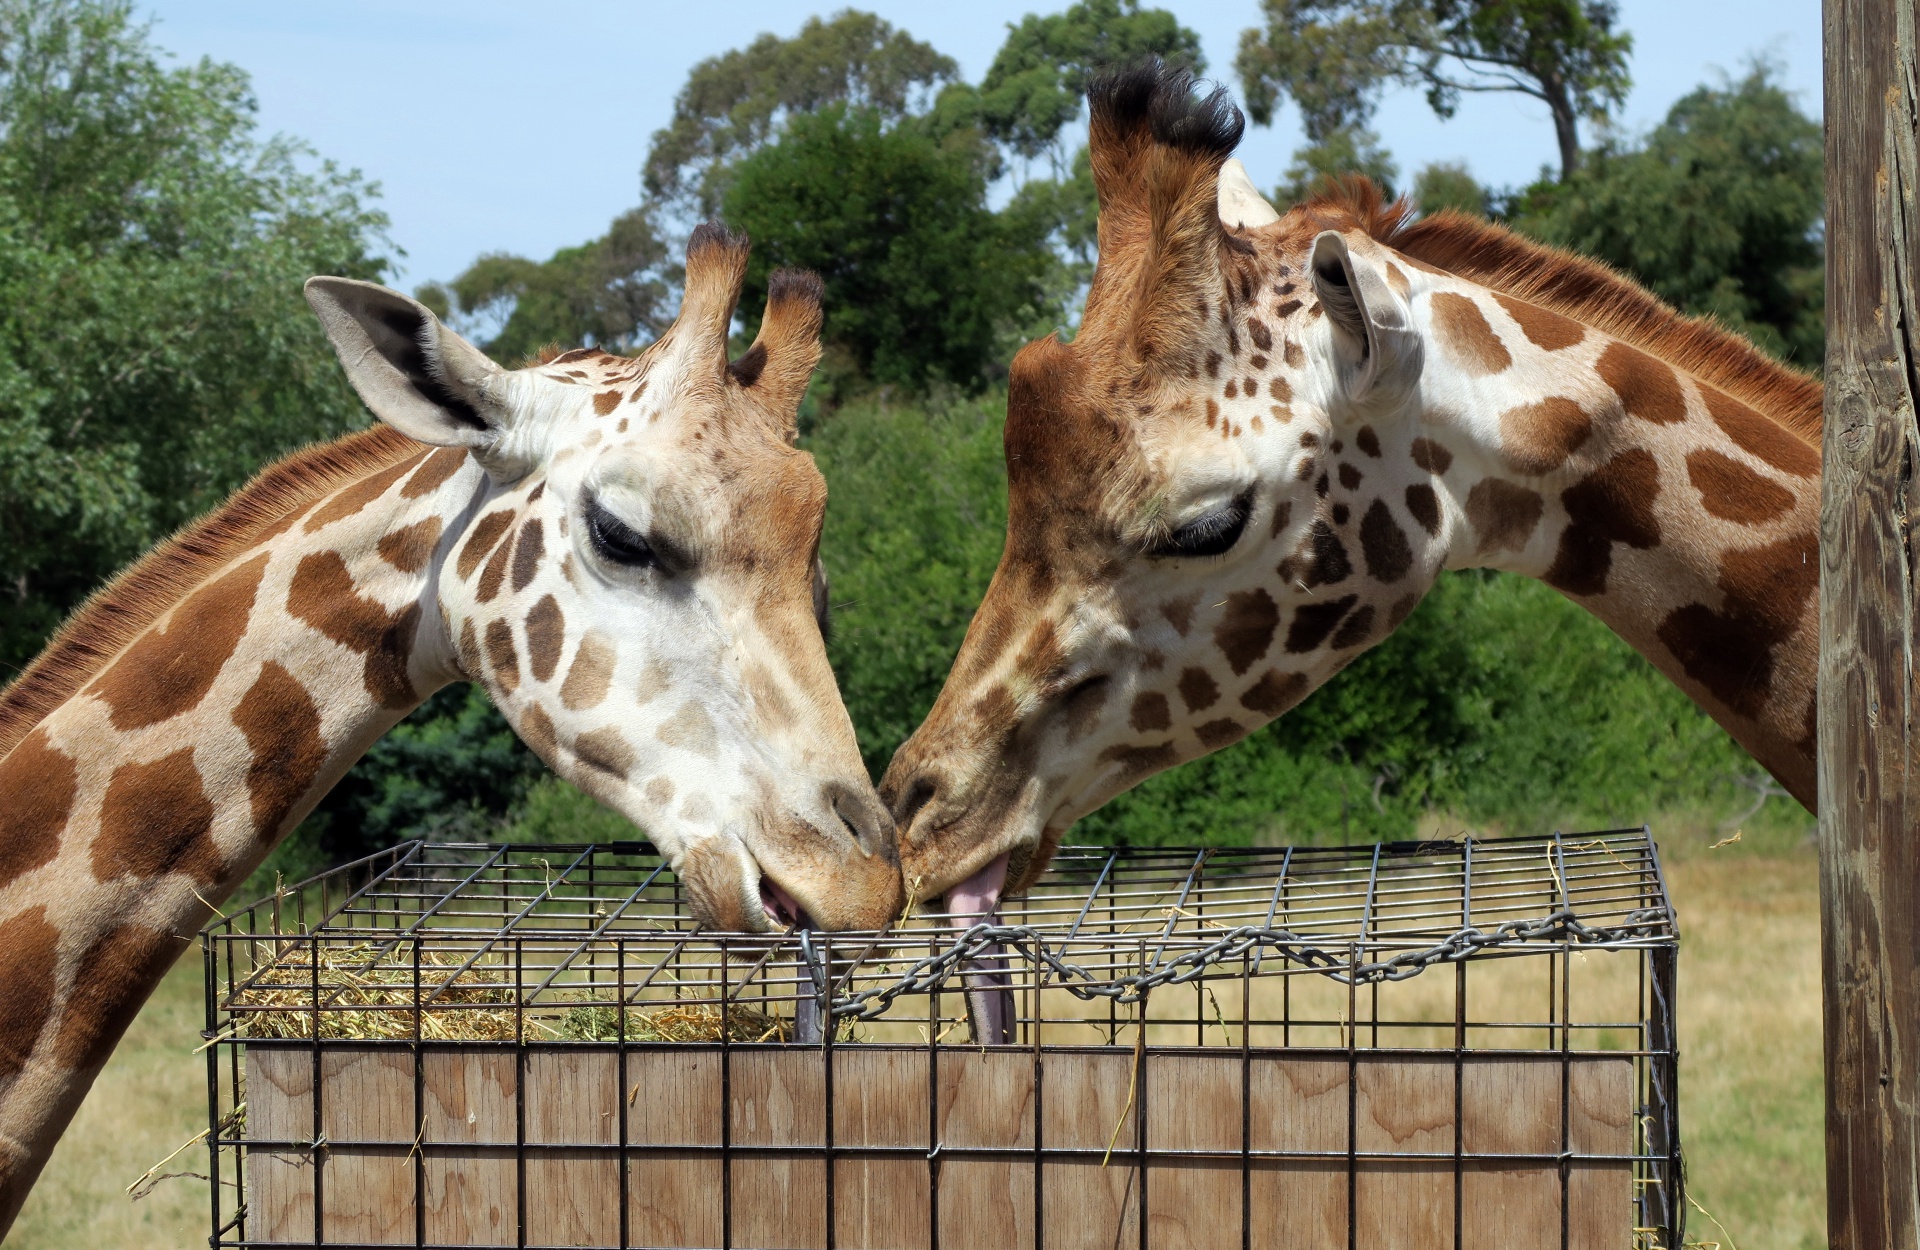 Giraffes and their long tongues!